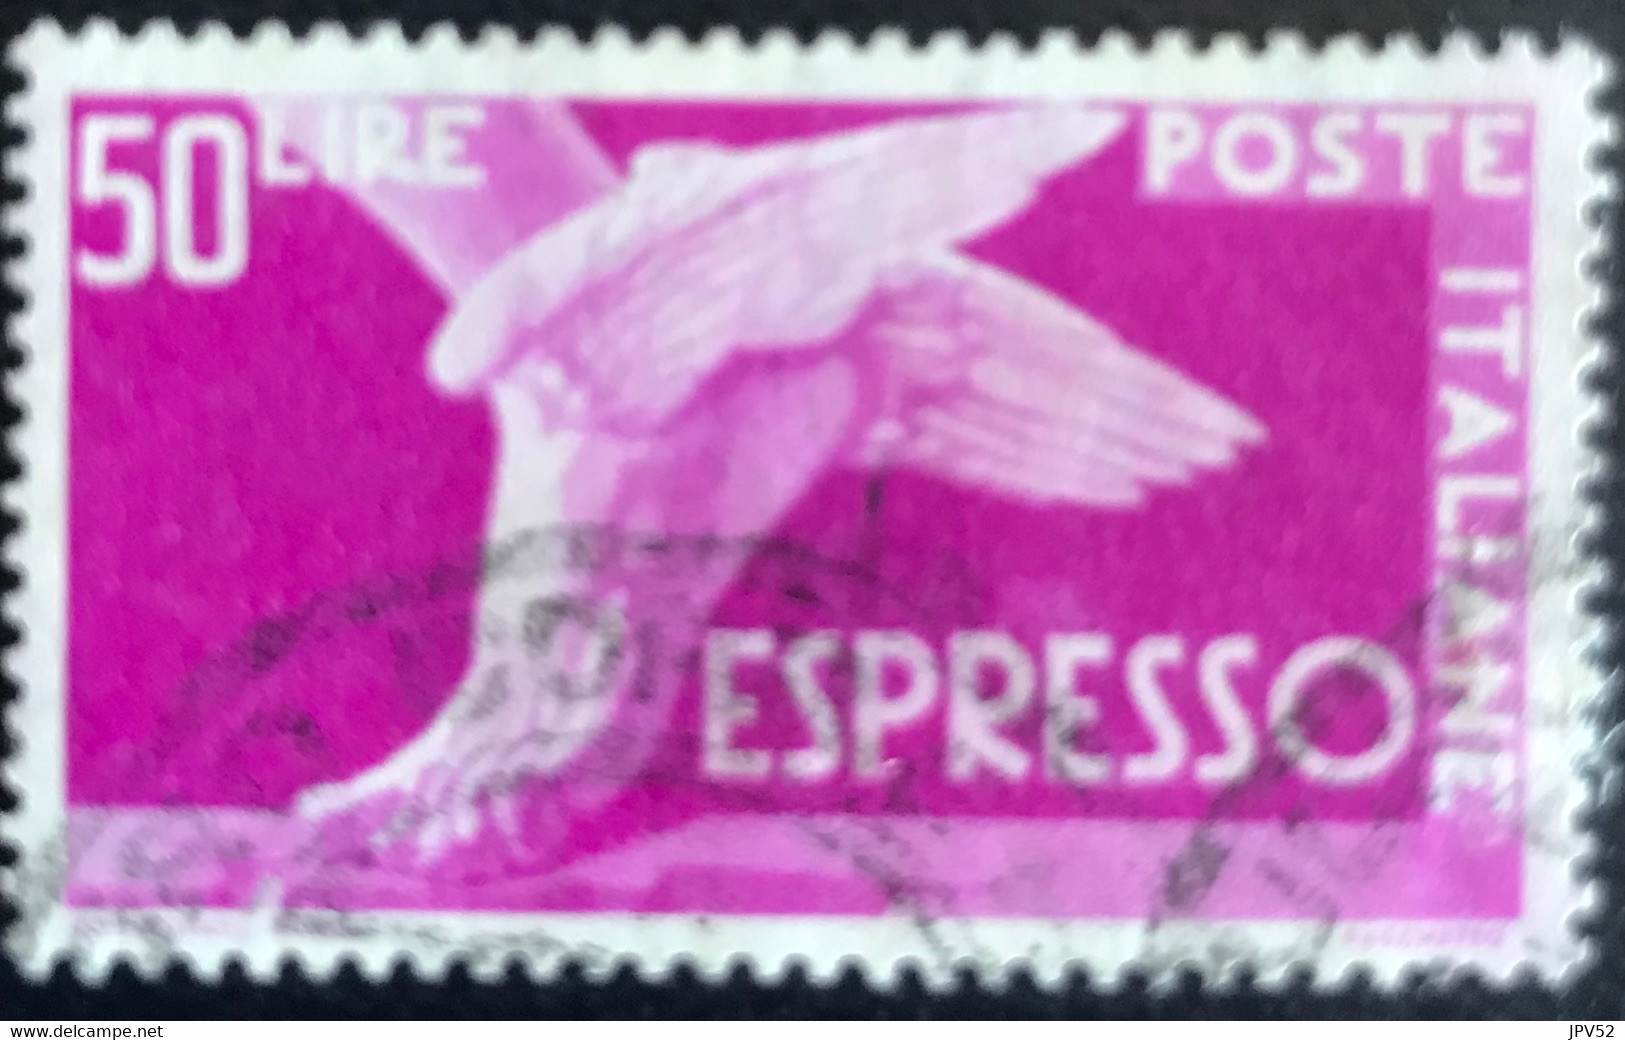 Italia - Italy - T2/13 - (°)used - 1945 - Michel 944 - Expresso - Express Mail